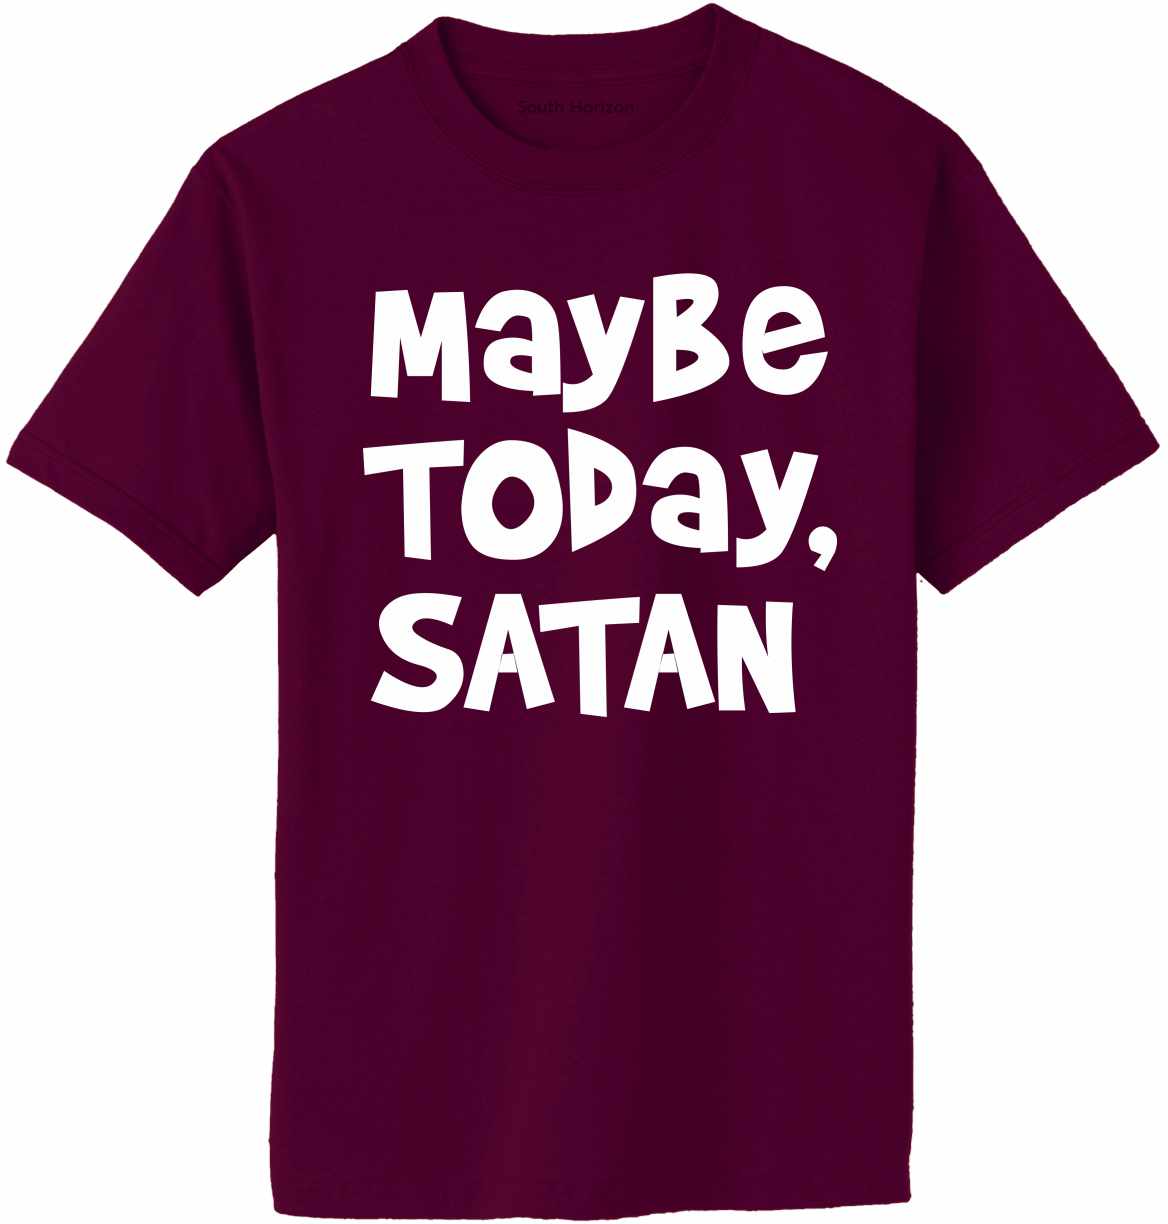 Maybe Today, Satan on Adult T-Shirt